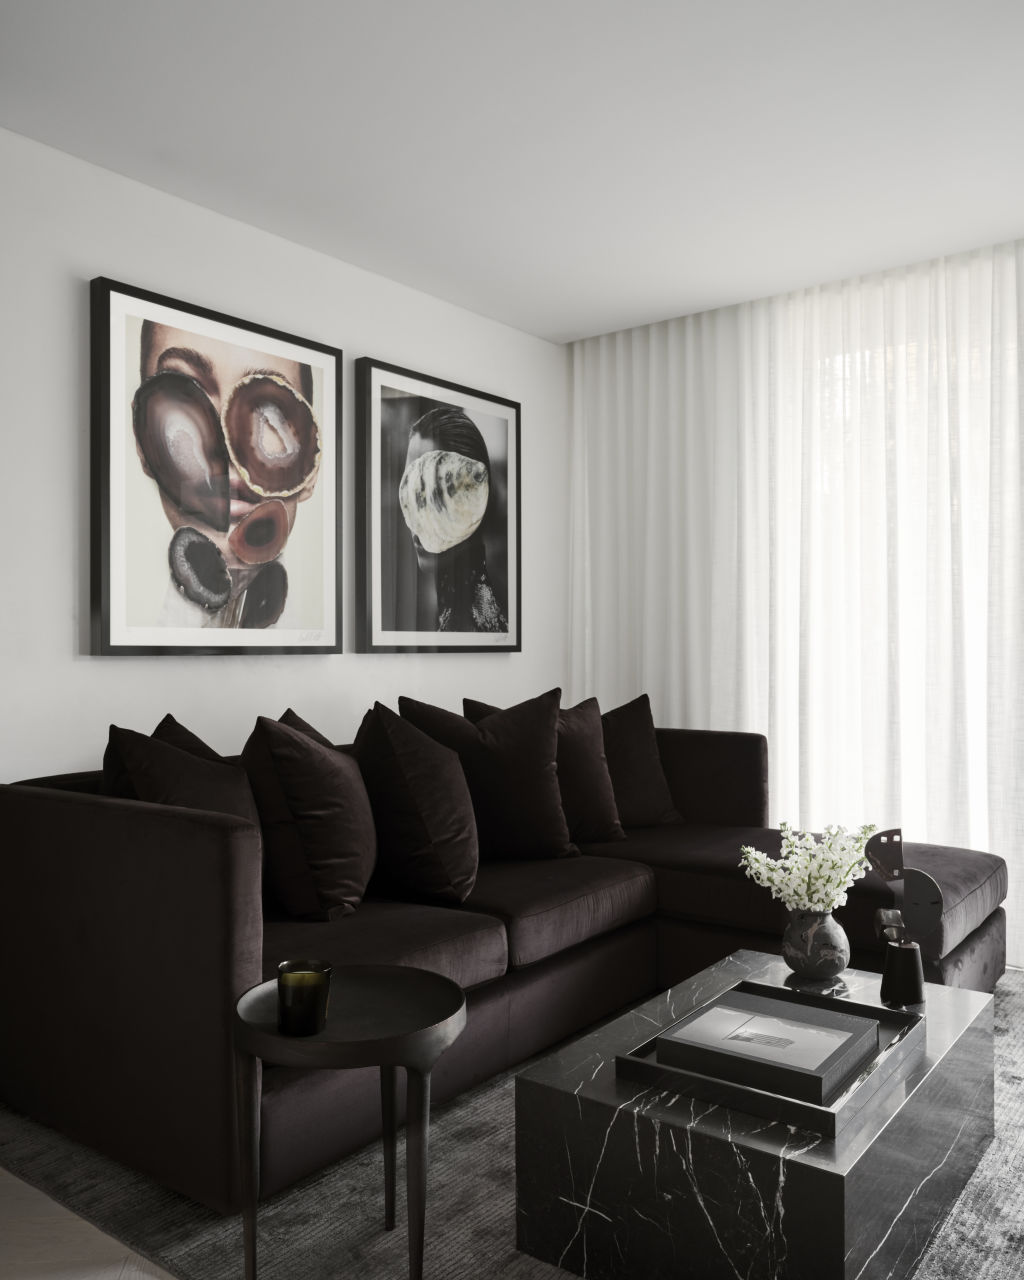 Rich chocolate brown and velvet feature throughout the space. Photo: Supplied